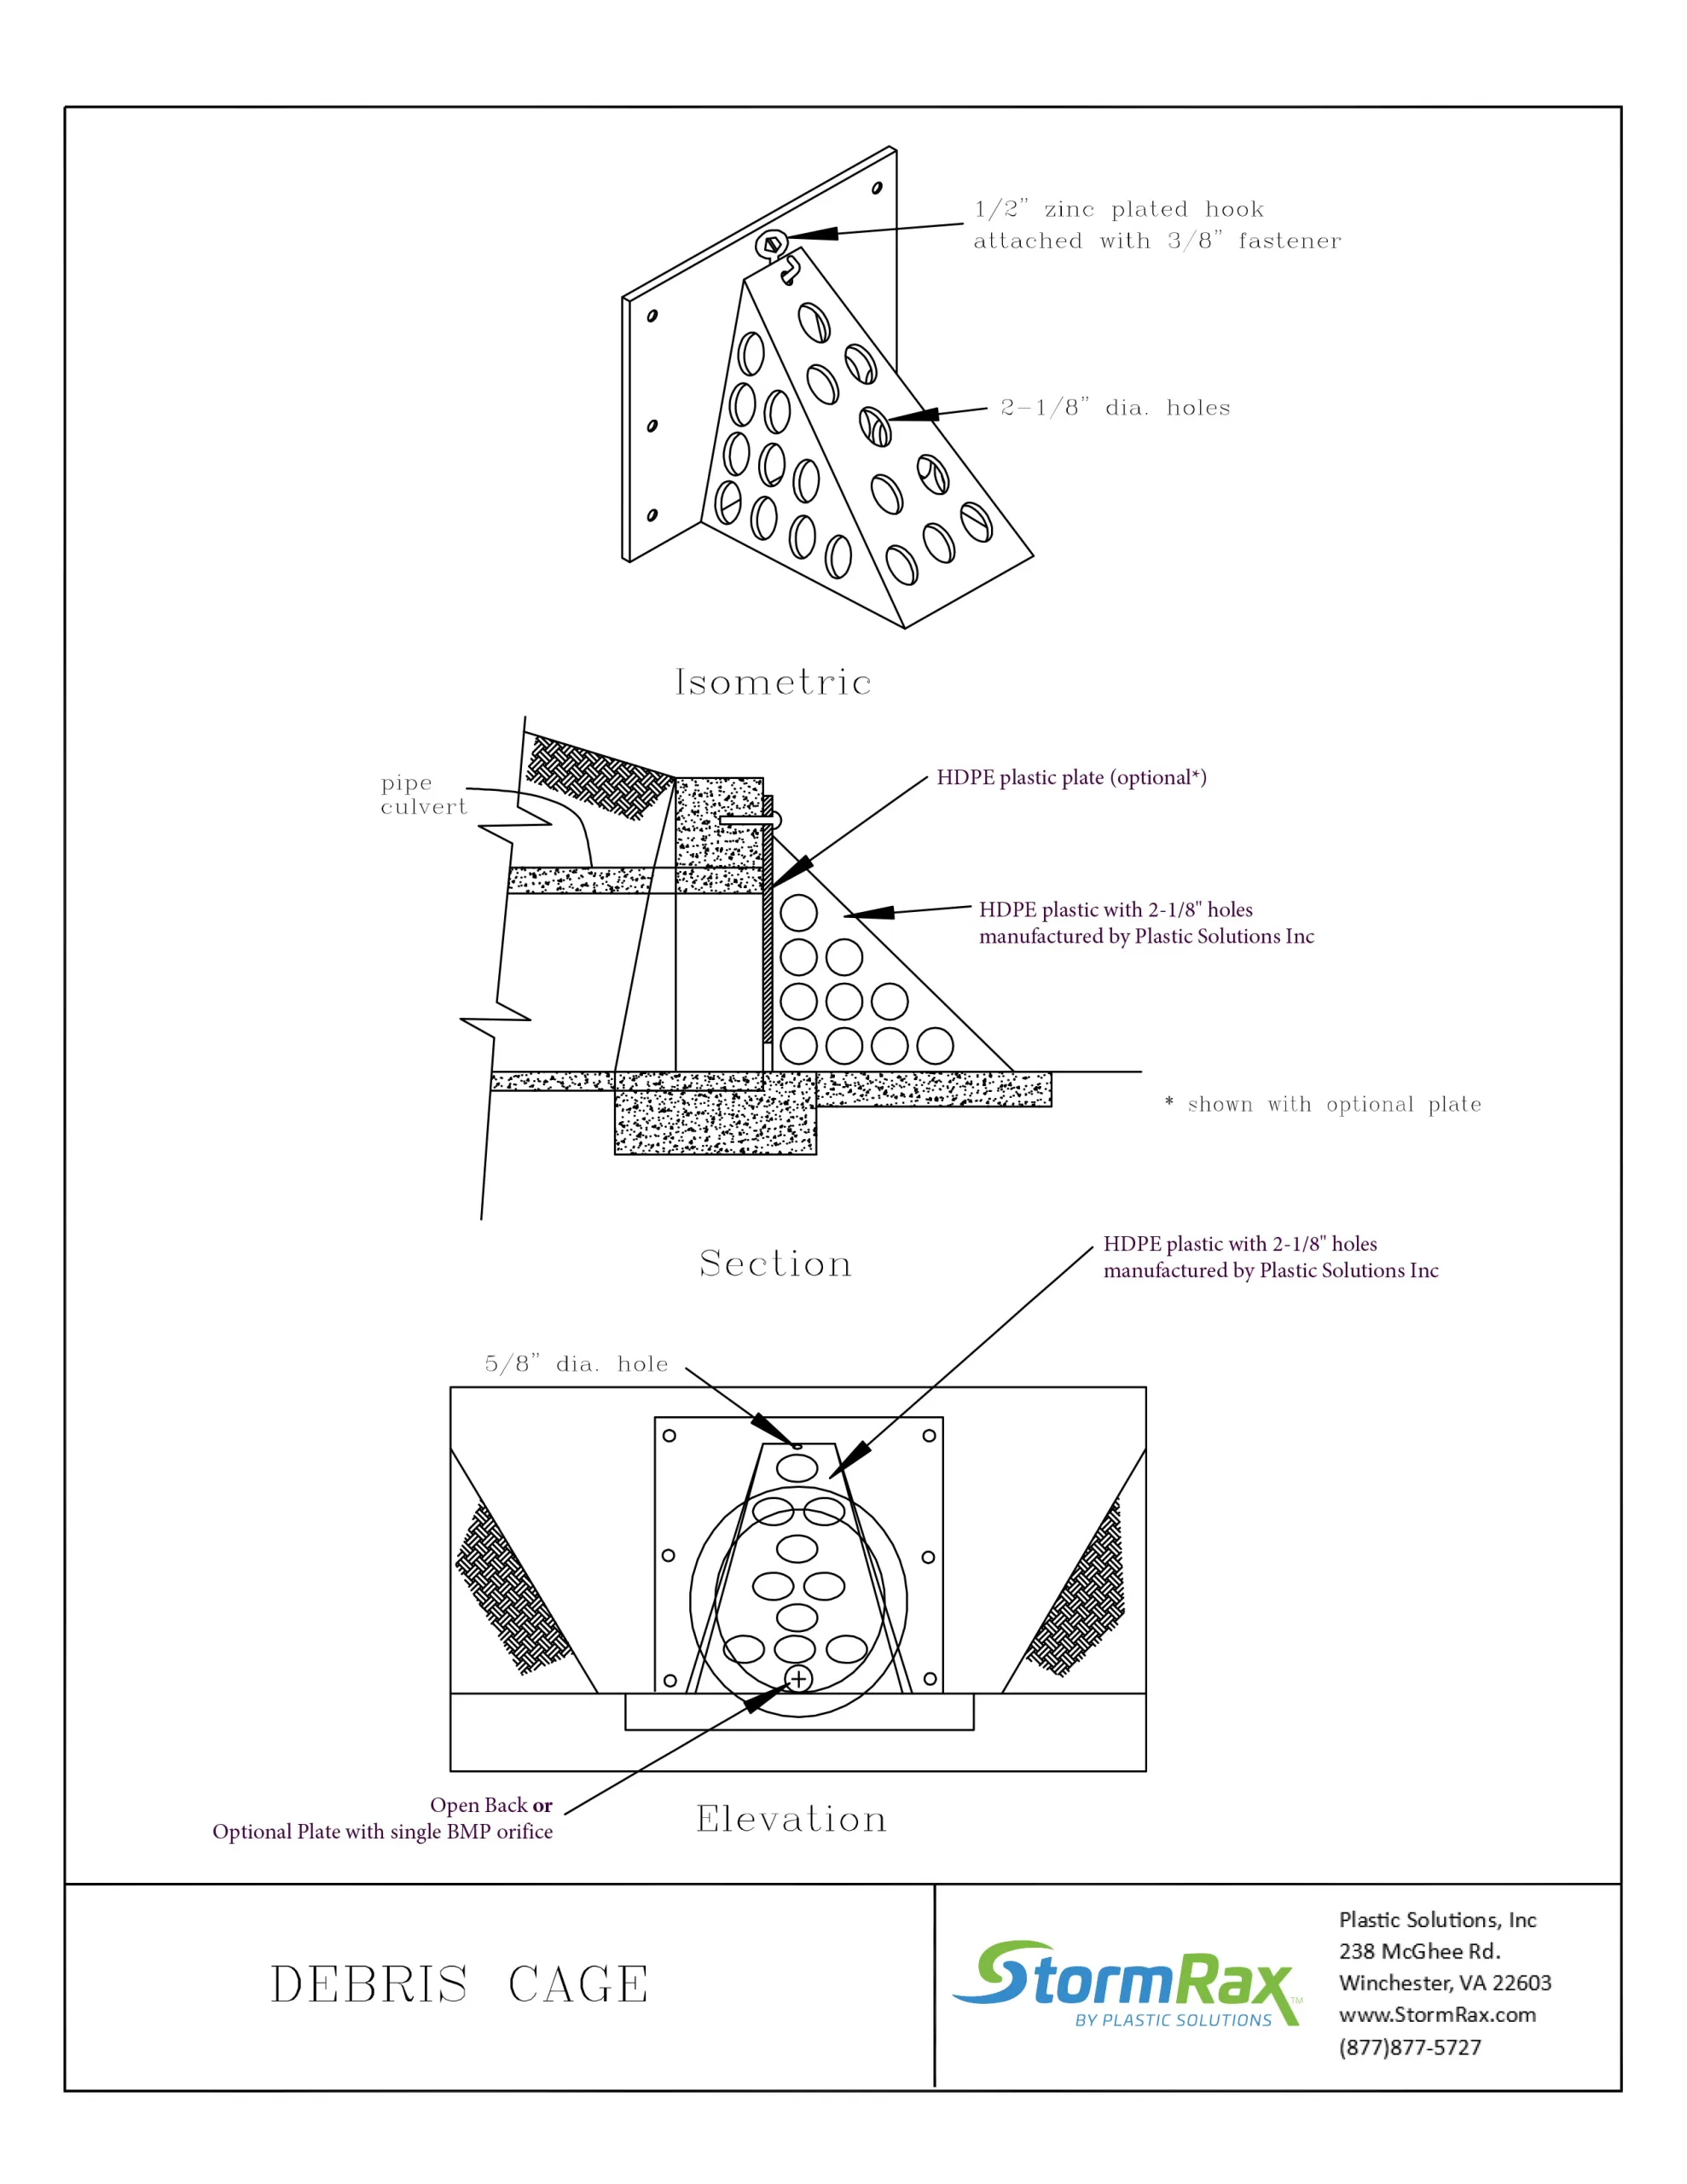 Technical drawing for stormrax debris cage